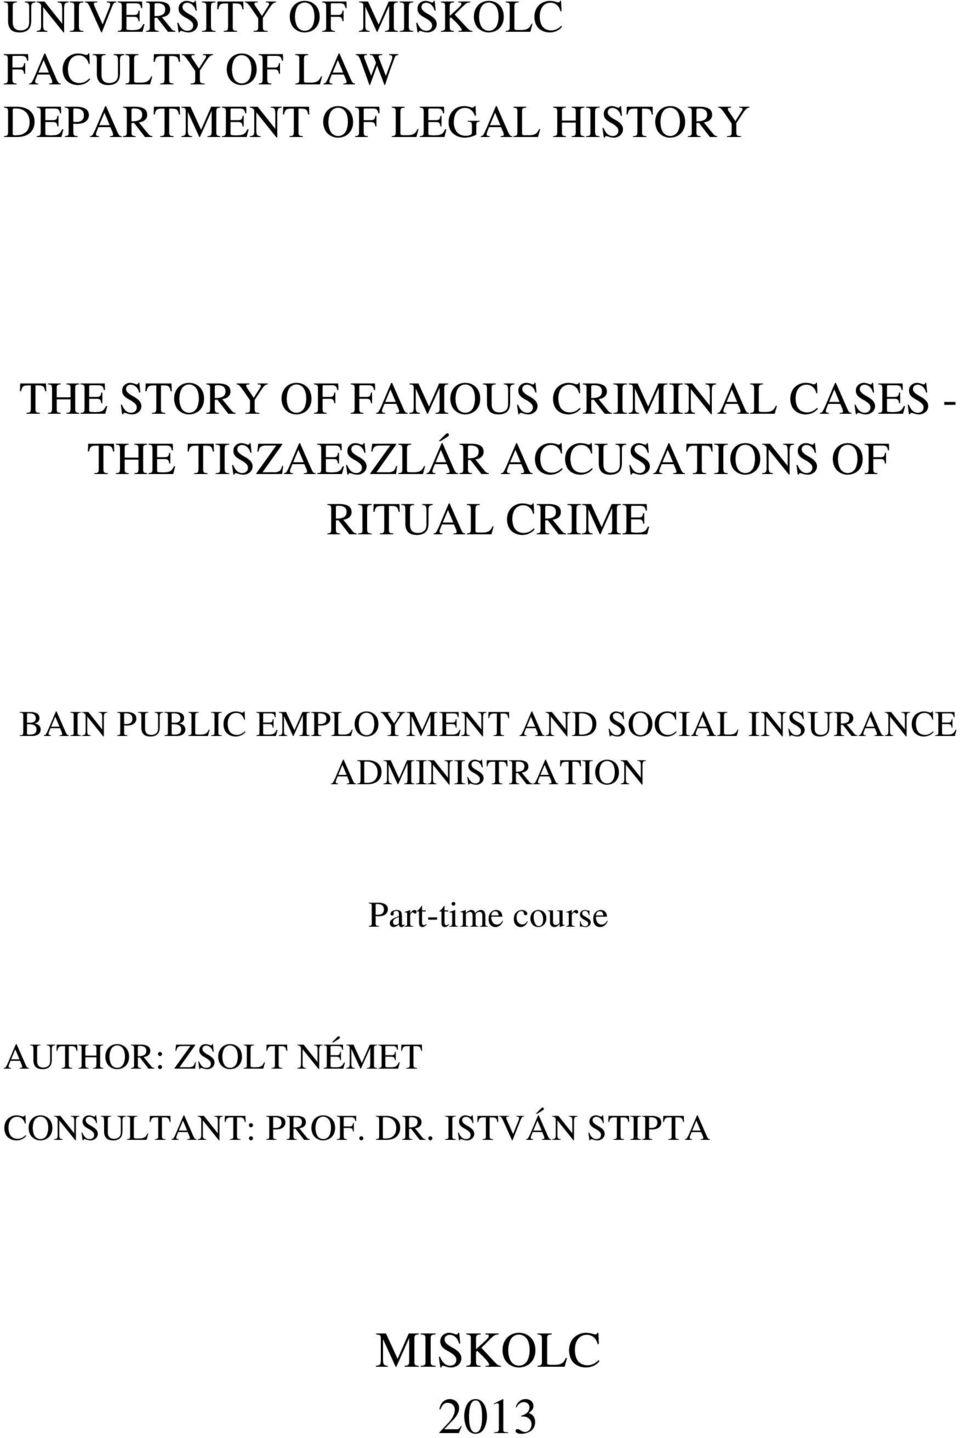 CRIME BAIN PUBLIC EMPLOYMENT AND SOCIAL INSURANCE ADMINISTRATION